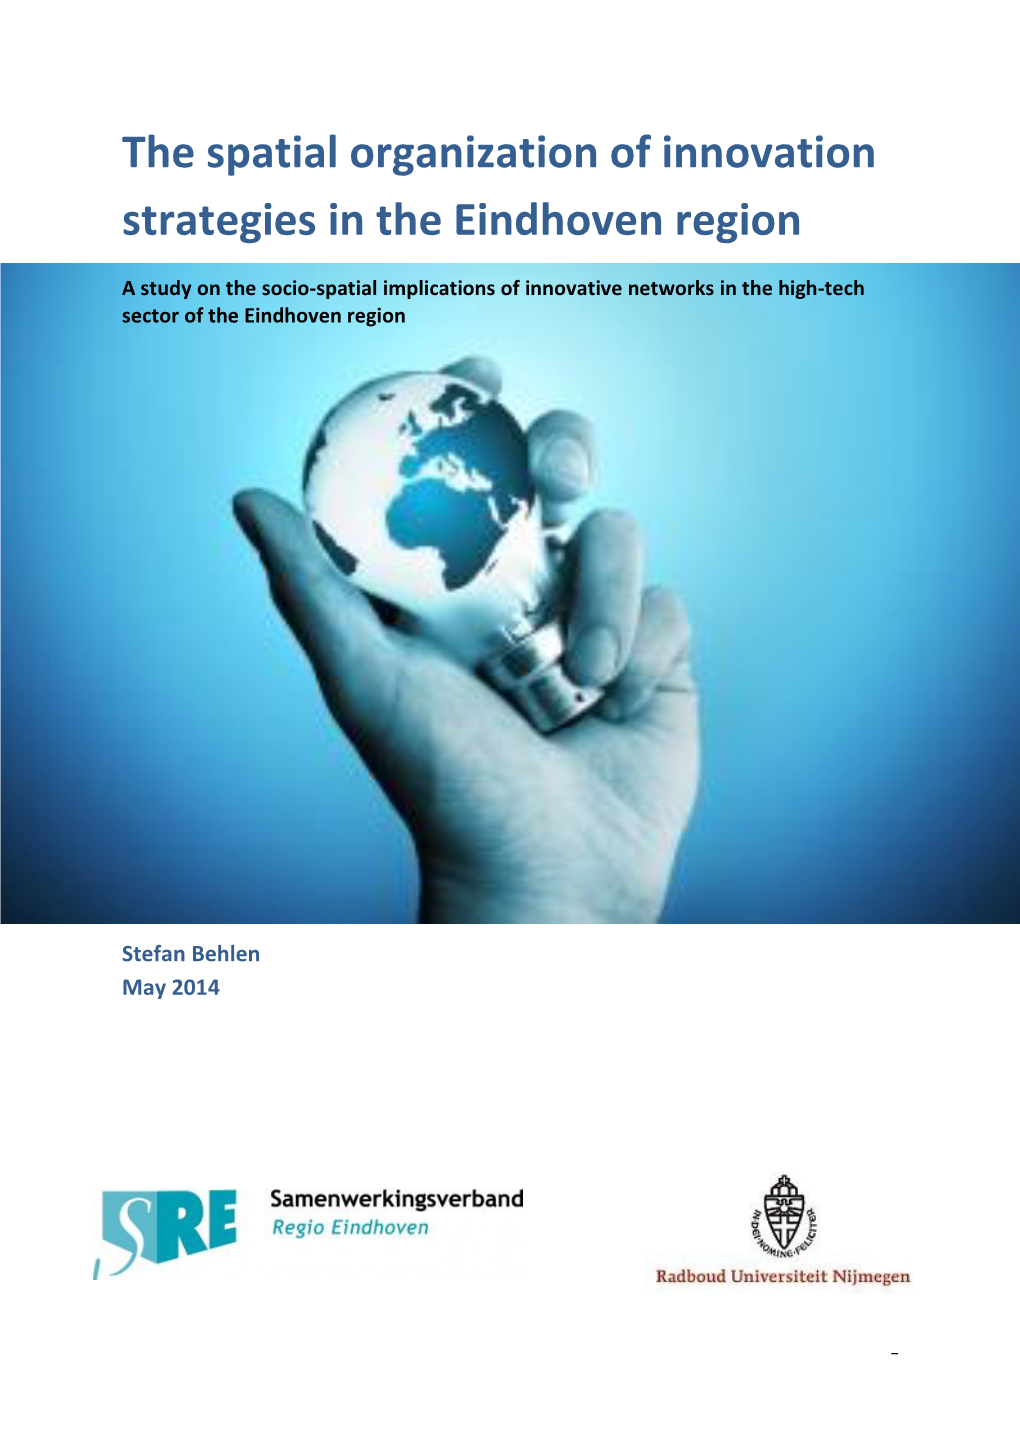 The Spatial Organization of Innovation Strategies in the Eindhoven Region